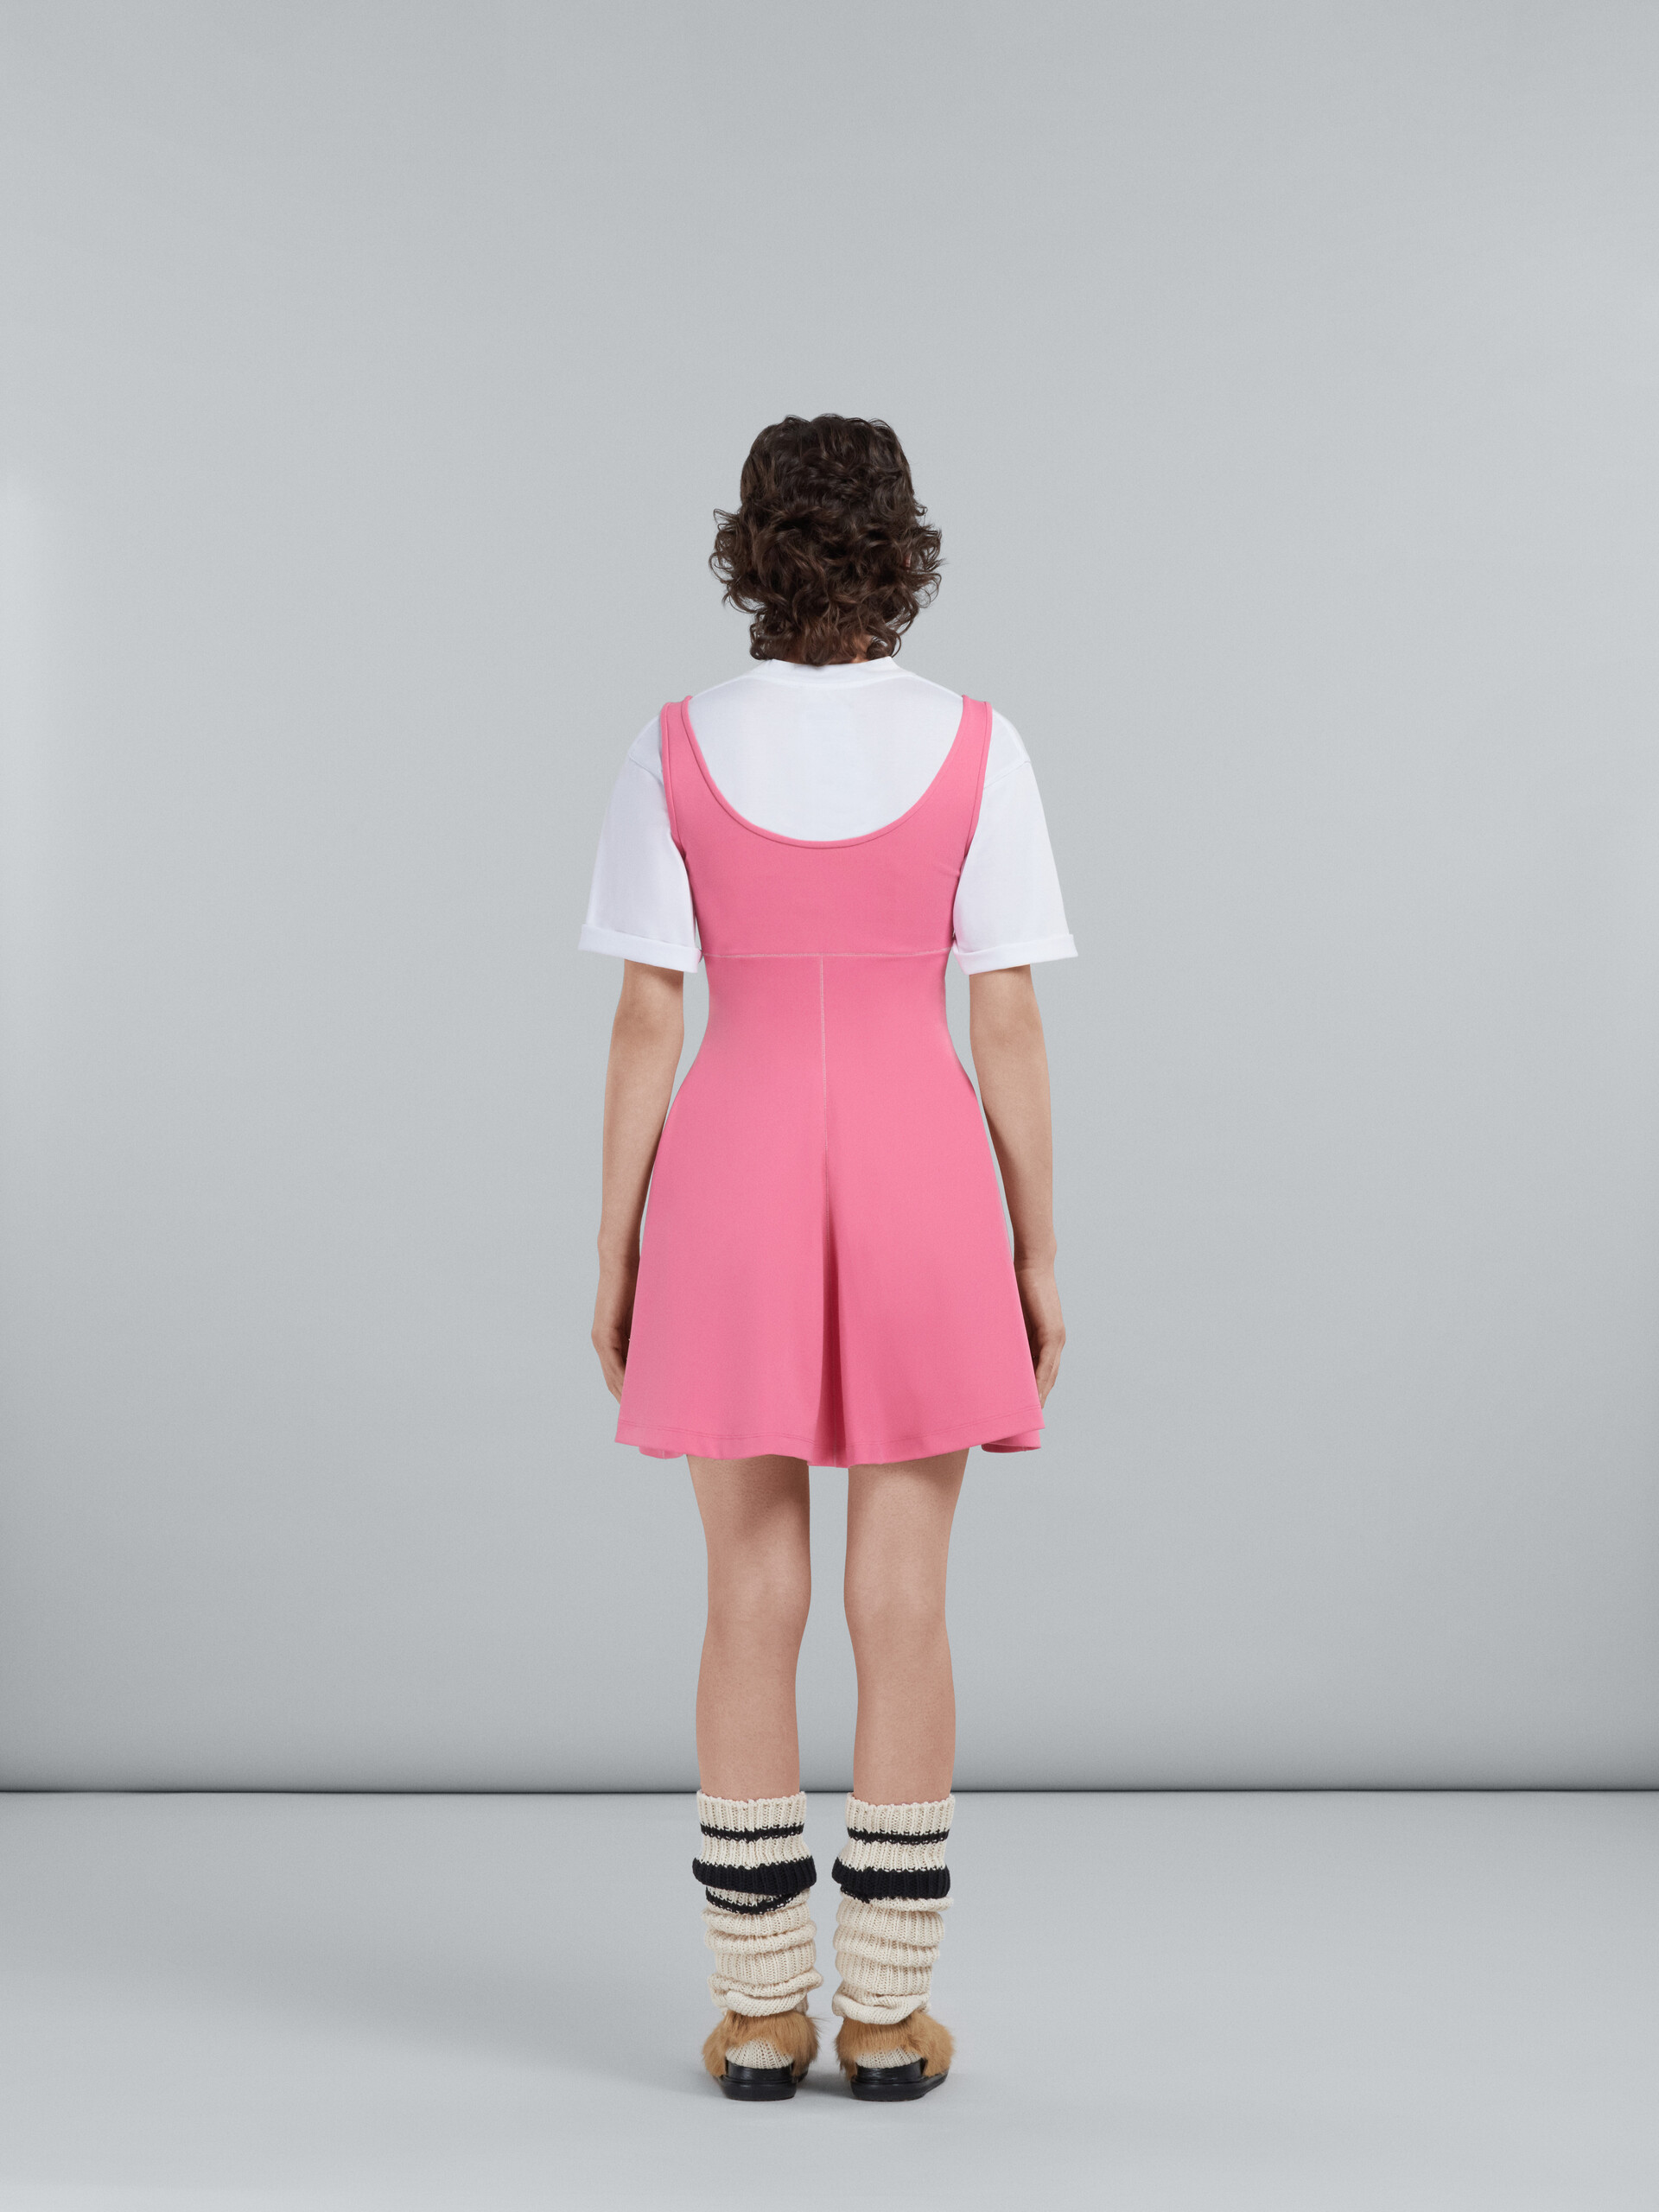 Short dress in pink stretch fabric - Dresses - Image 3